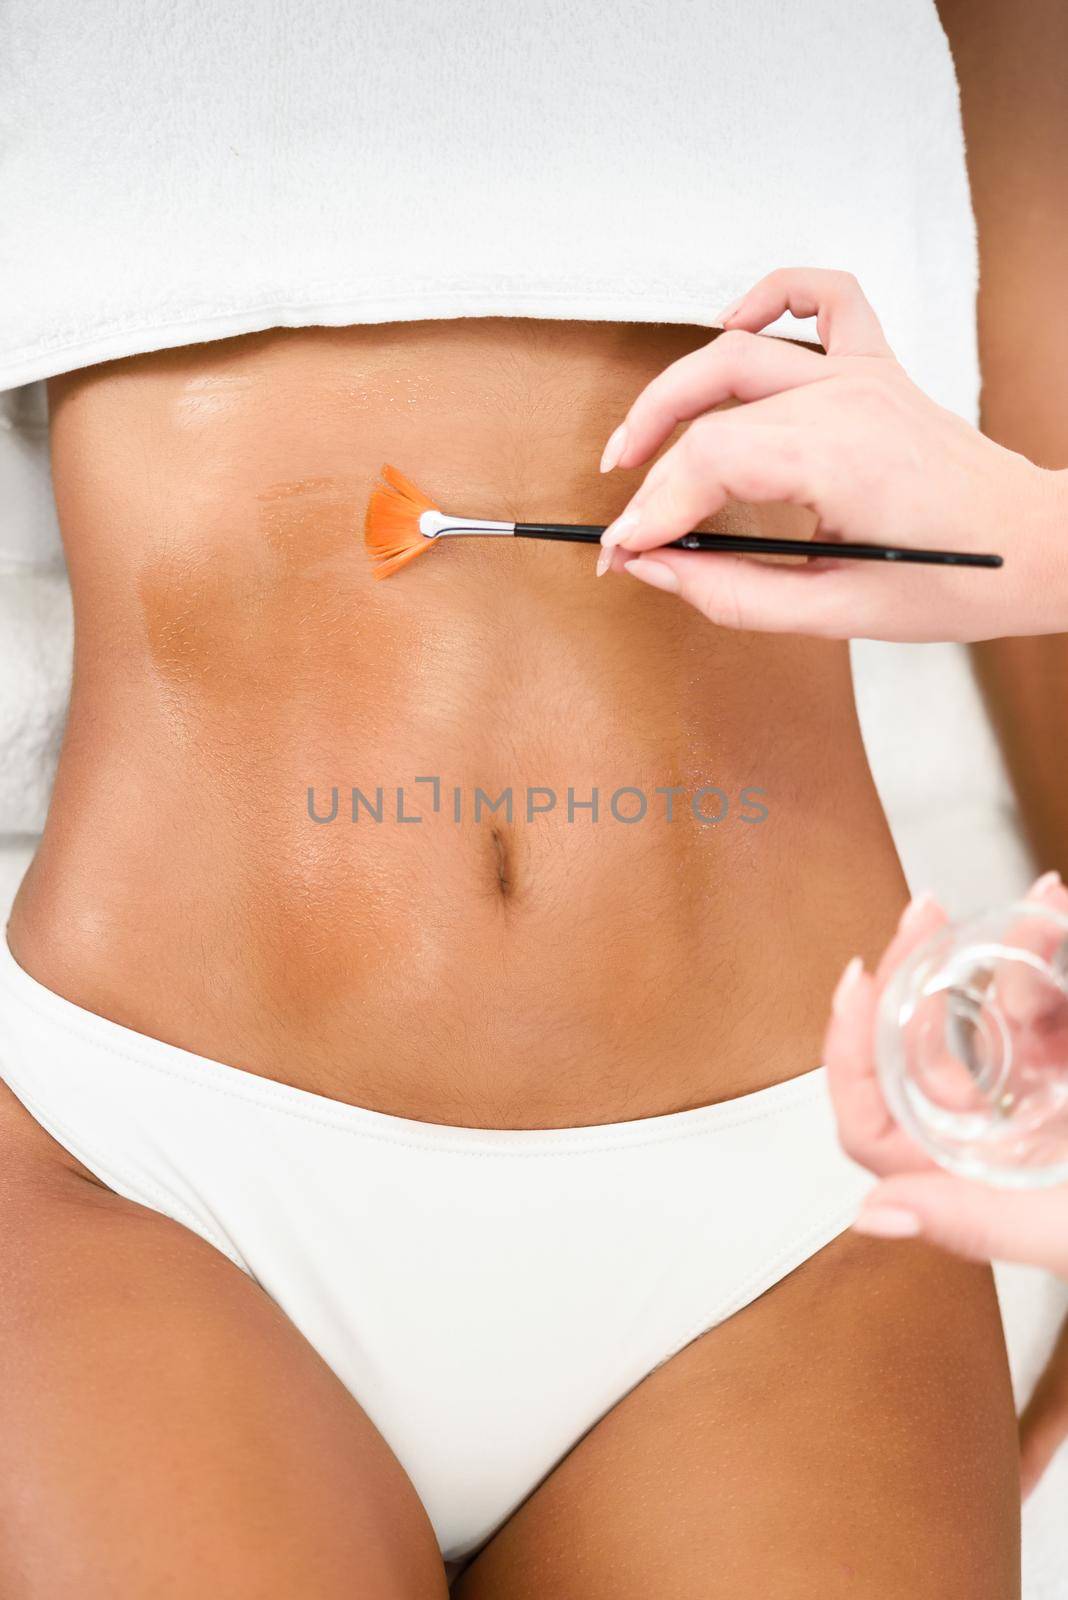 Woman receiving belly massage treatment with oil brush in spa wellness center. Beauty and Aesthetic concepts.